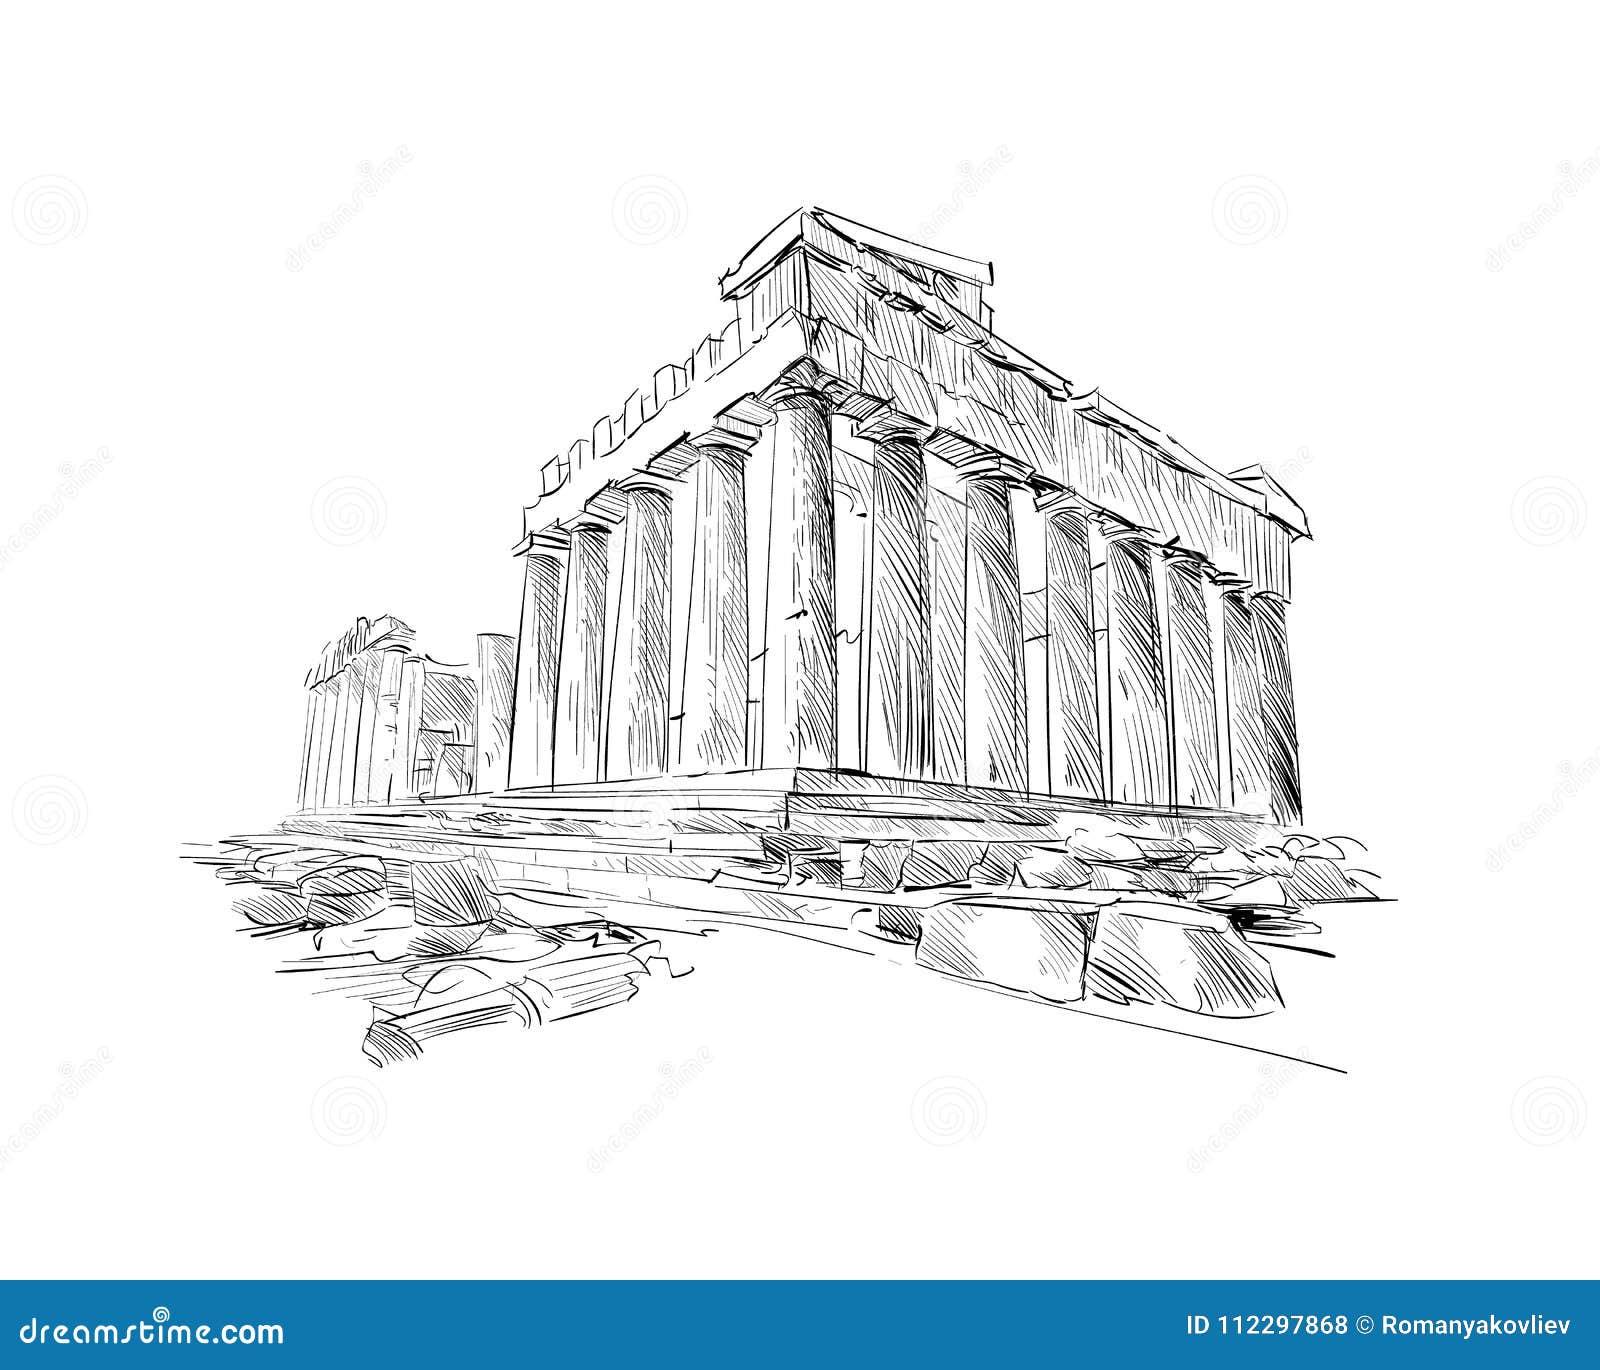 Drawings of Athens on Behance